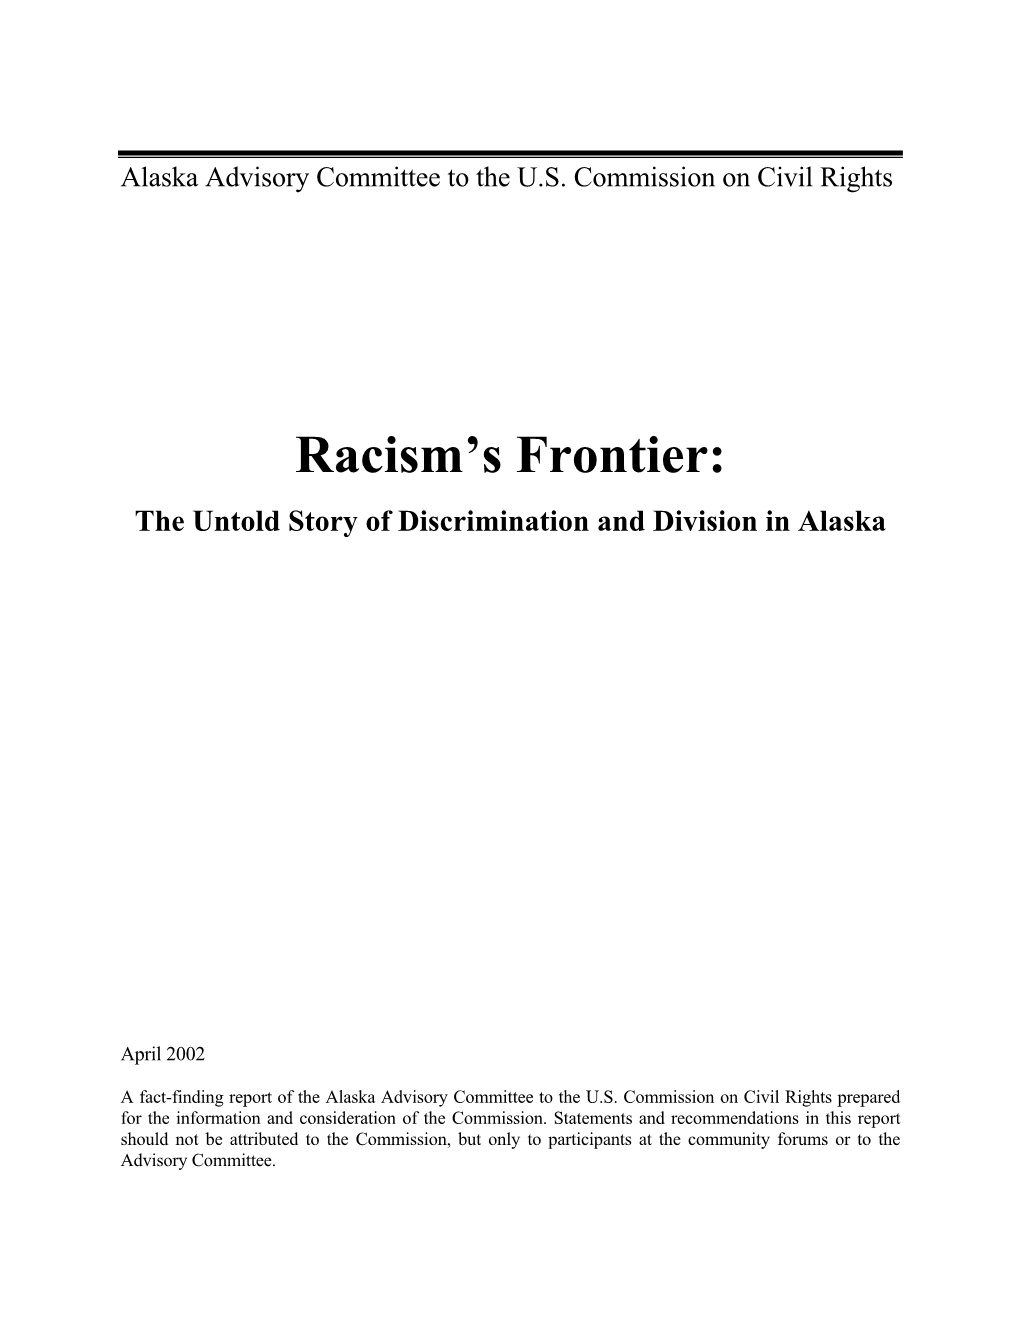 Alaska Advisory Committee to the US Commission on Civil Rights